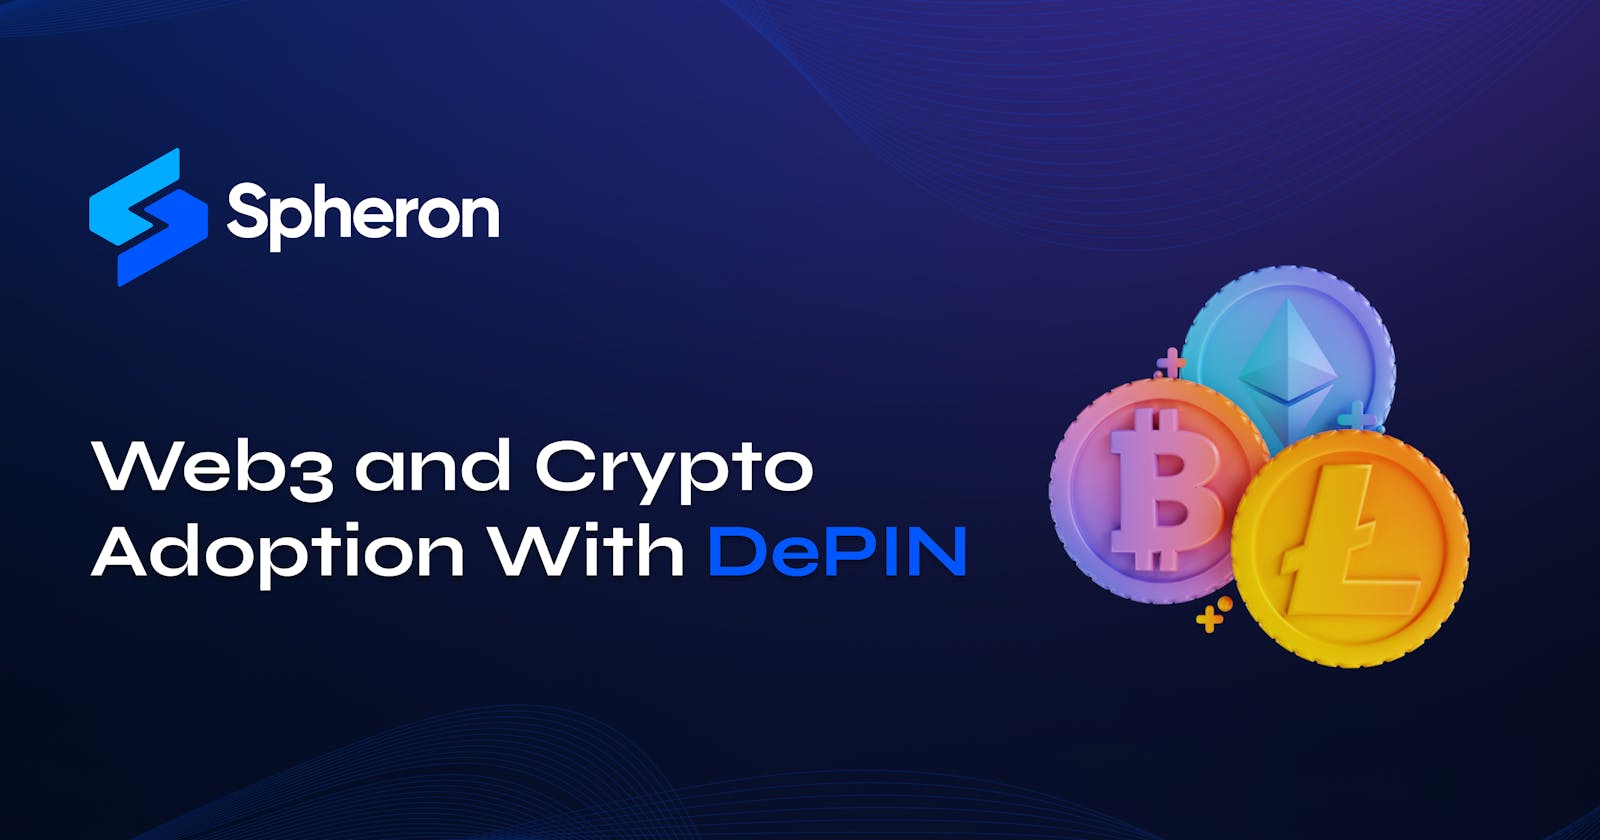 Web3 and Crypto Adoption With DePIN